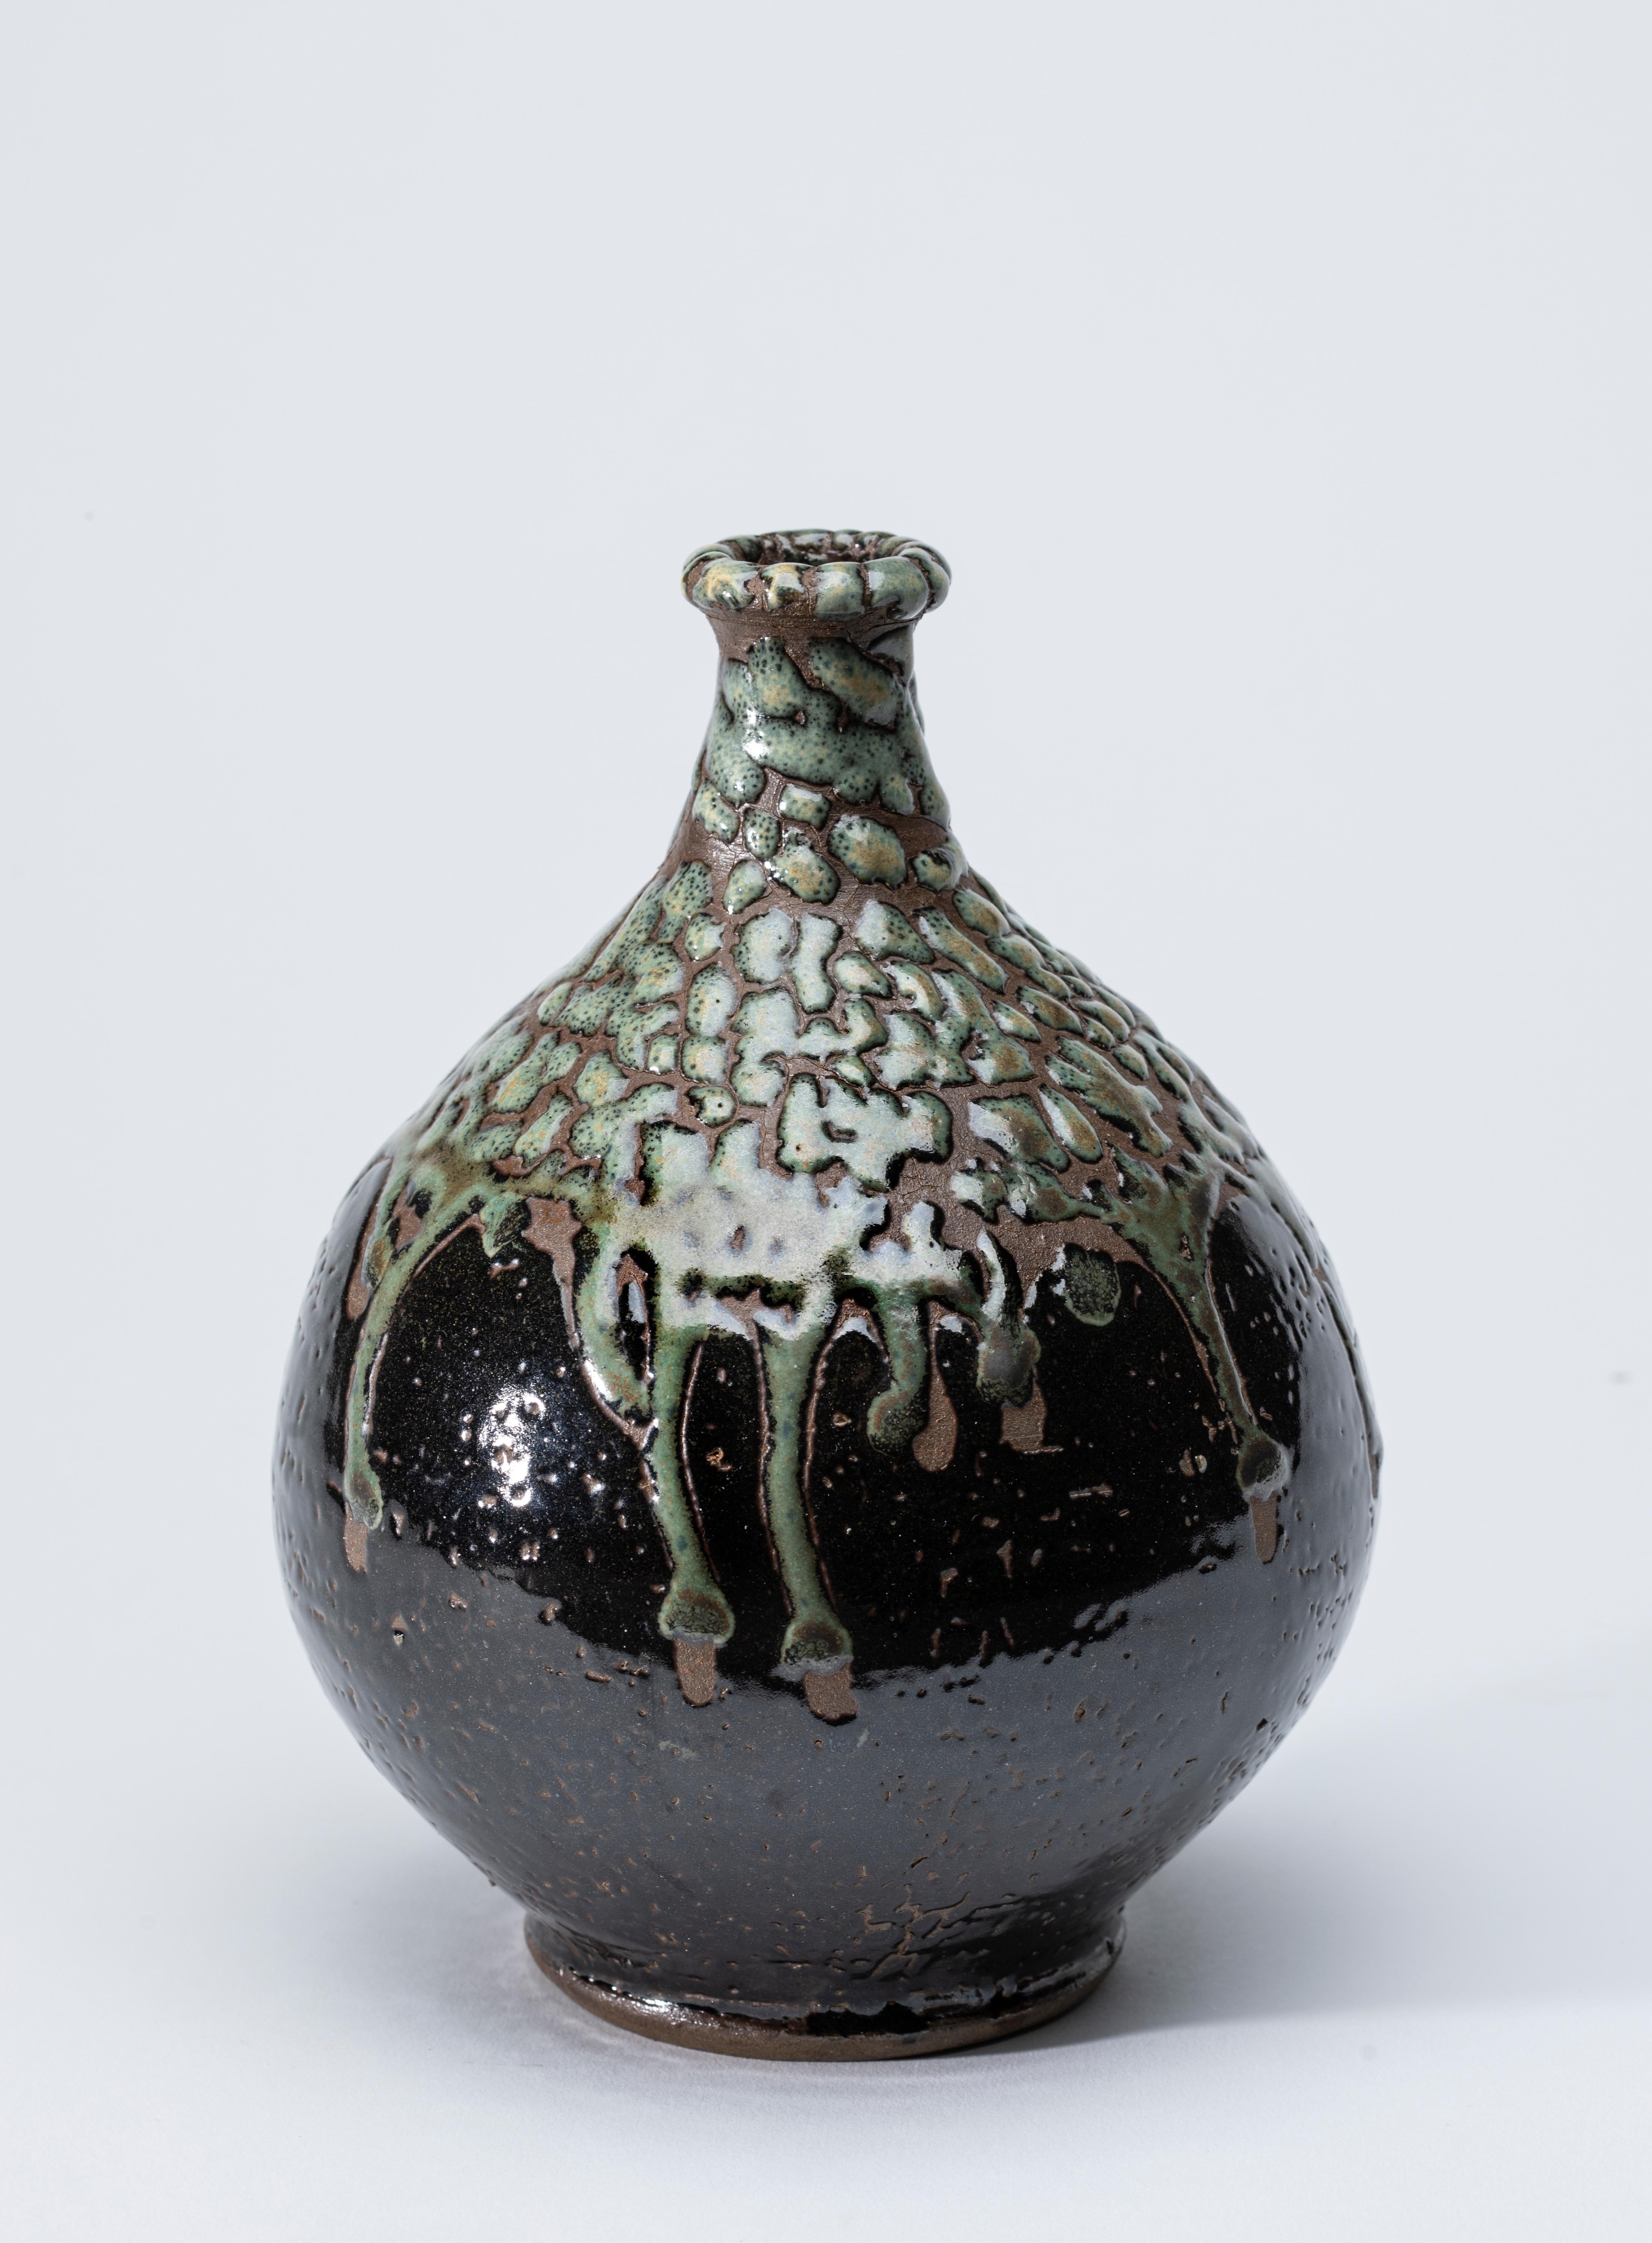 Green and Dark Brown Japanese Vase with Green Raised Glaze 

This vase is lovely from every angle.
We filmed all sides as well as top and bottom.
And, we were stunned by the beauty of this work of art.
The bottom half appears to be a very Dark